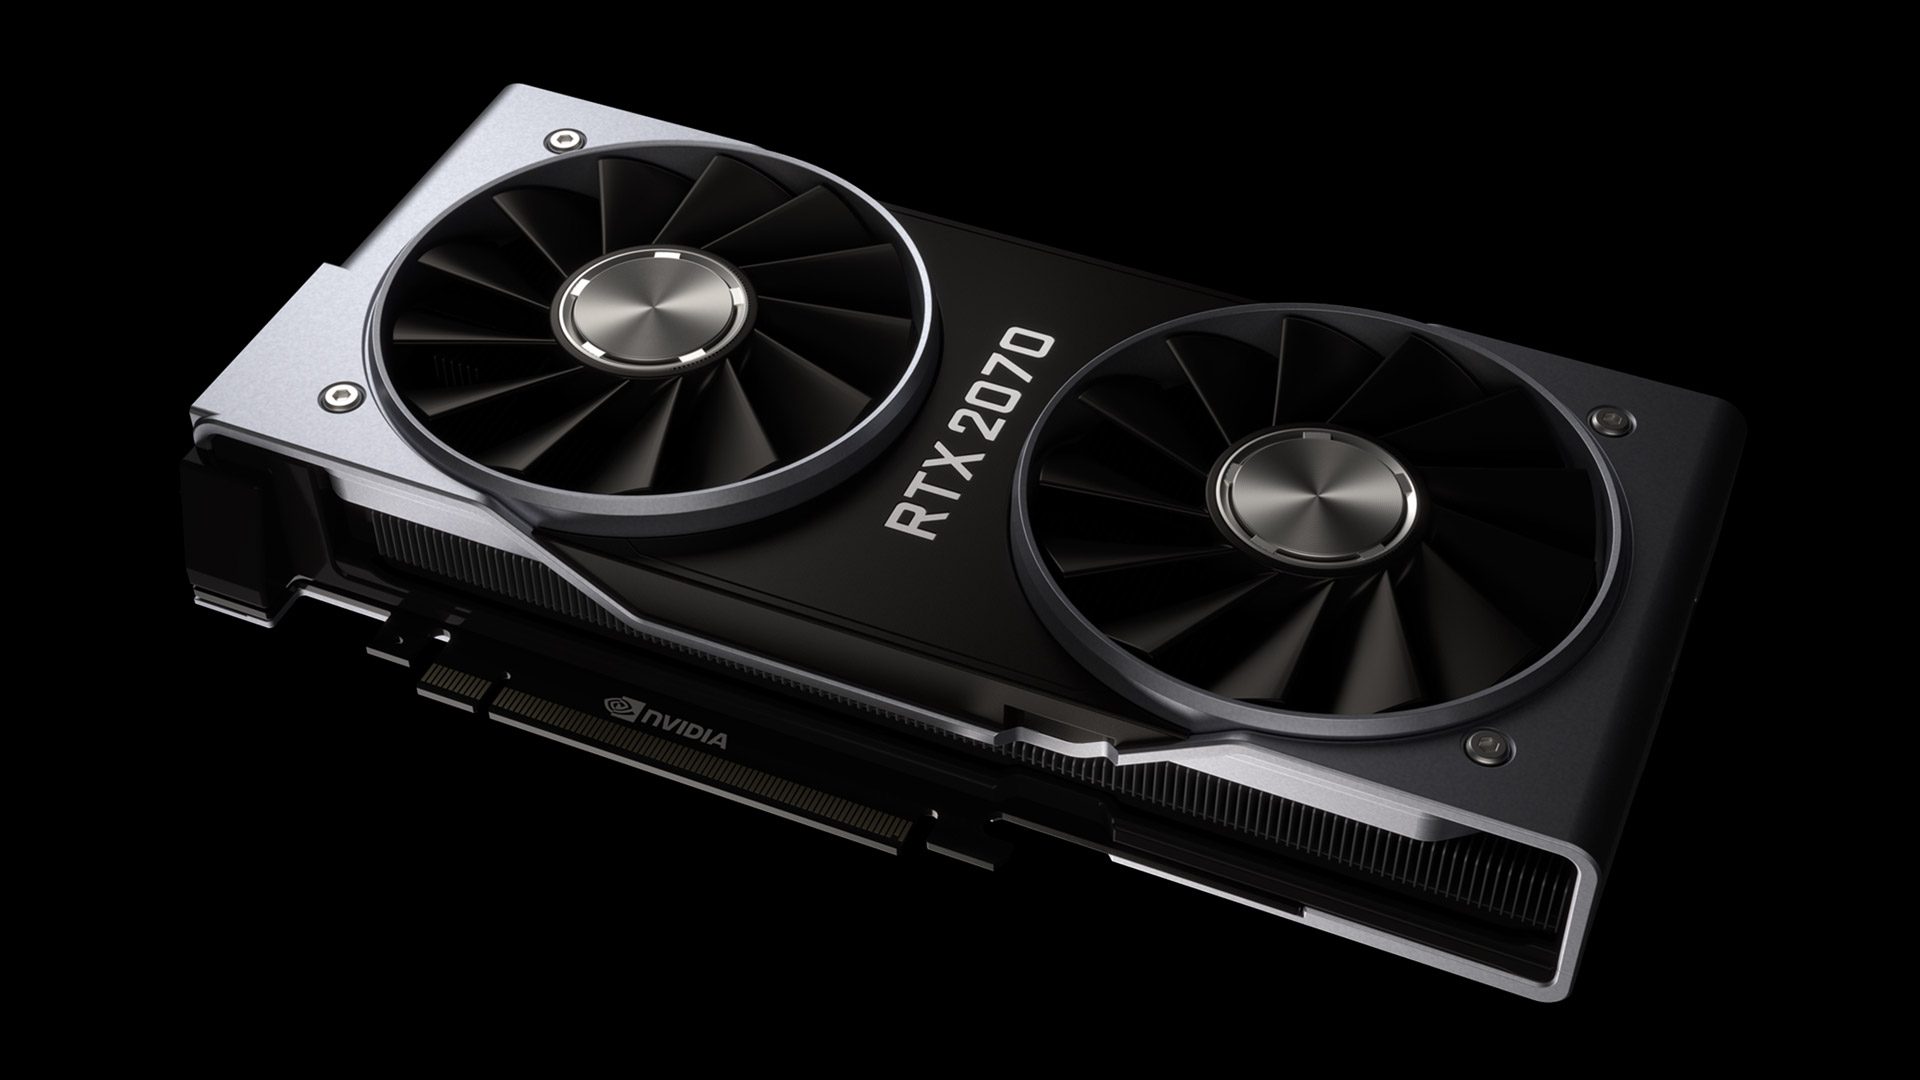 GeForce Cards Announced with VirtualLink Connector